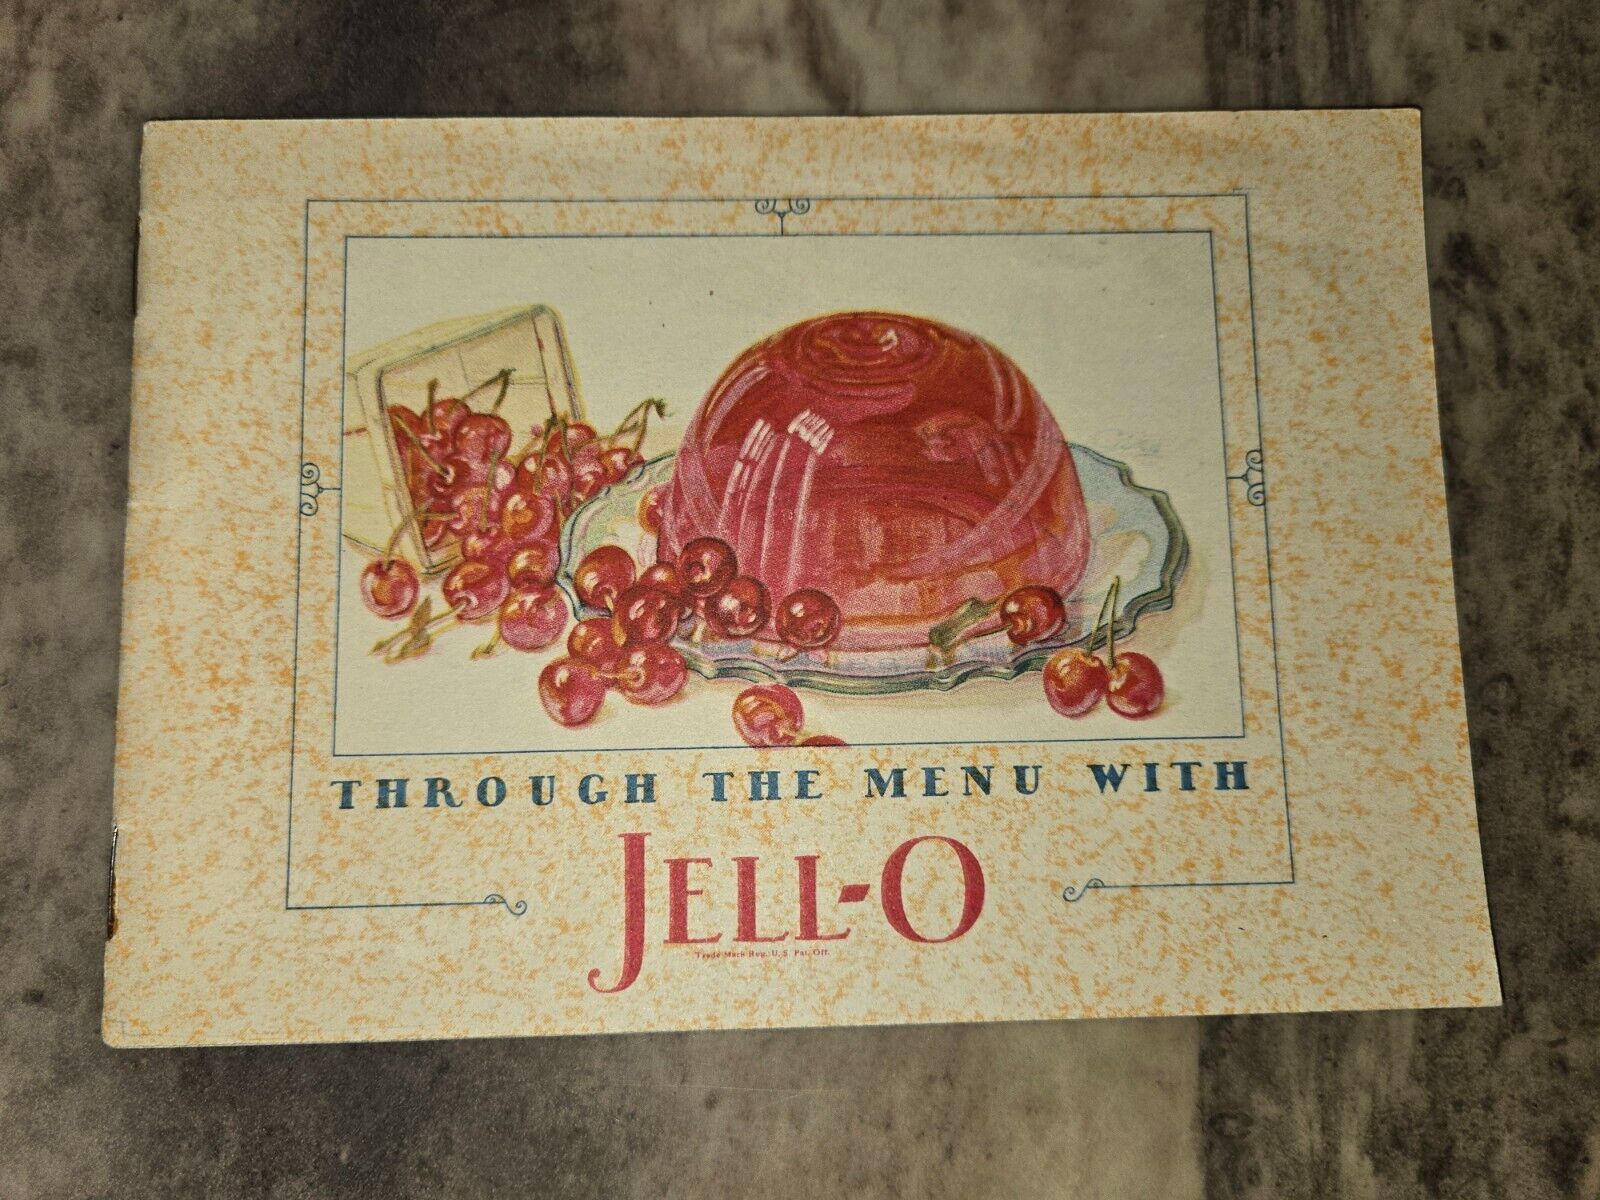 1927 JELL-O RECIPE BOOK THROUGH THE MENU WITH 24 PGS MOLD OFFER IN BACK A+FINE